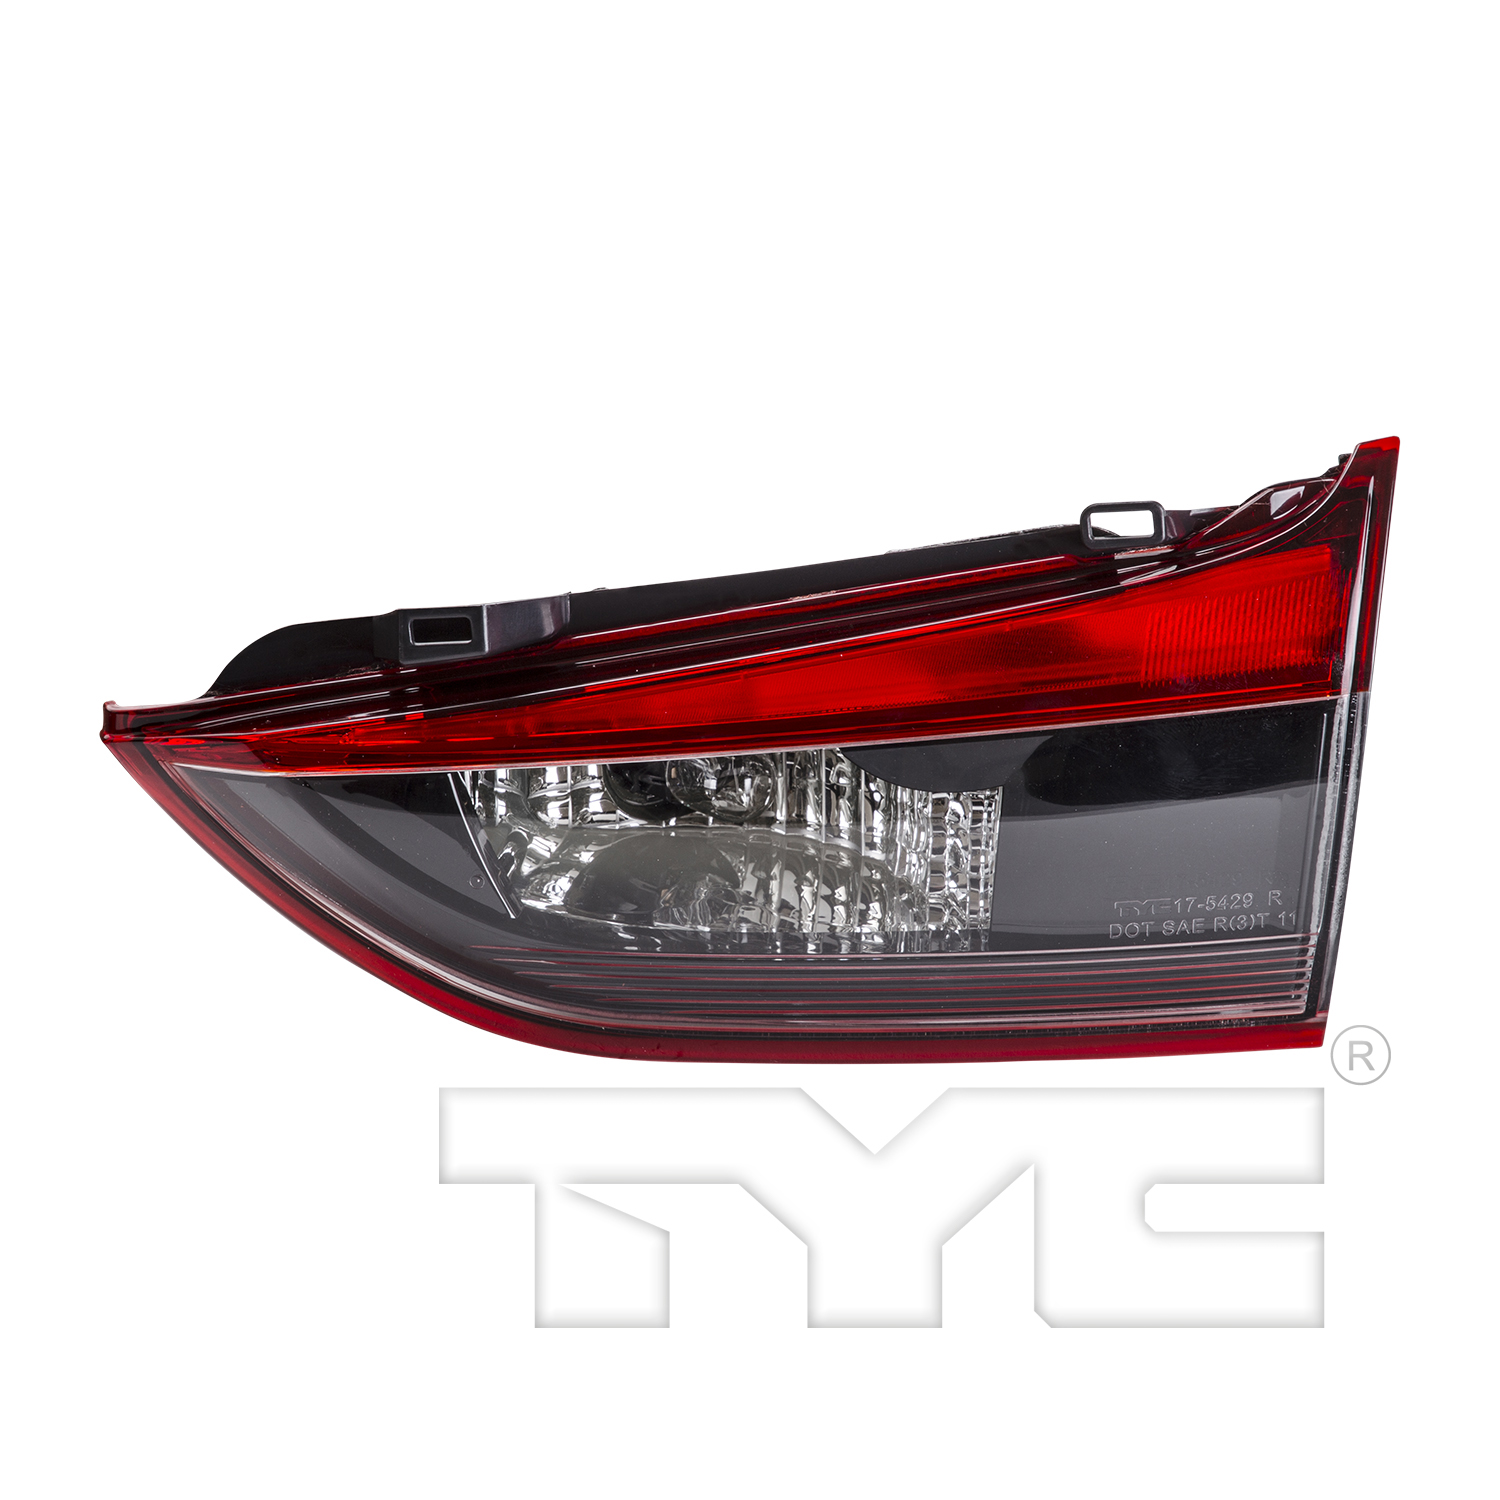 Aftermarket TAILLIGHTS for MAZDA - 6, 6,14-17,RT Taillamp assy inner